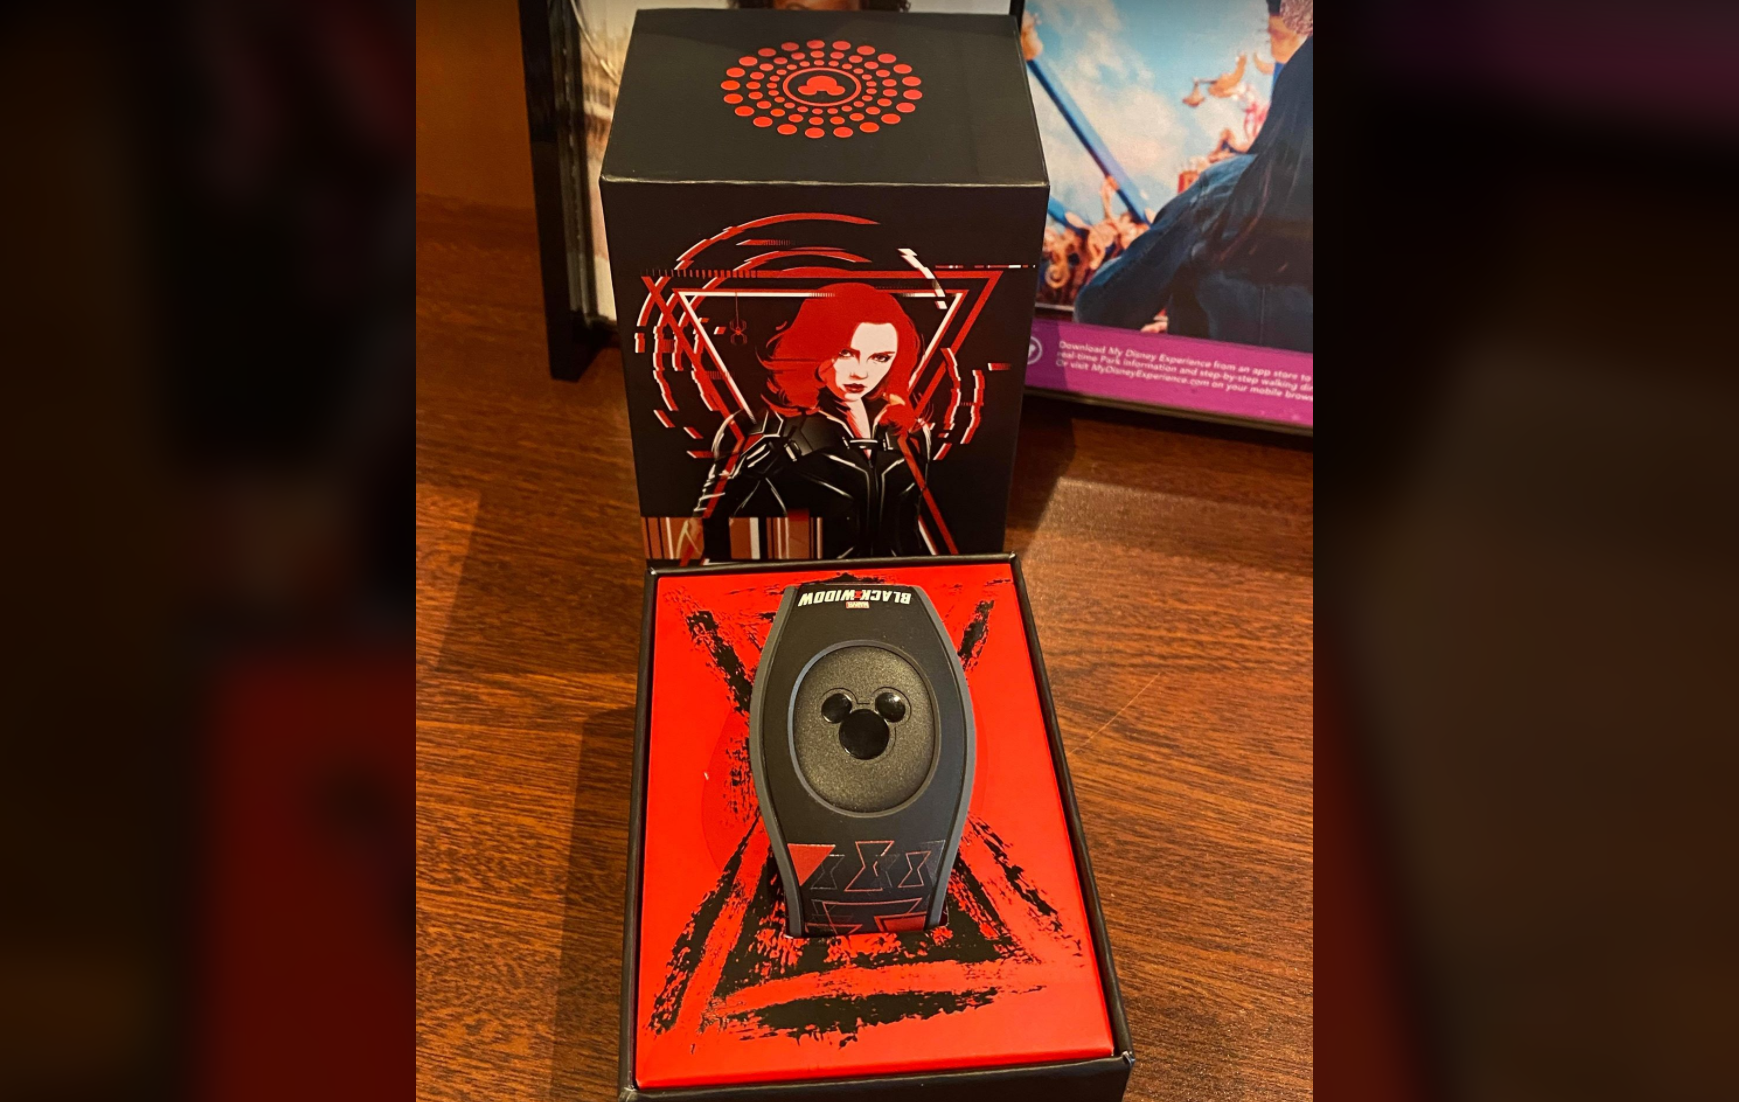 Details about   Disney Parks Marvel Avengers Black Widow Magicband 2 NWT